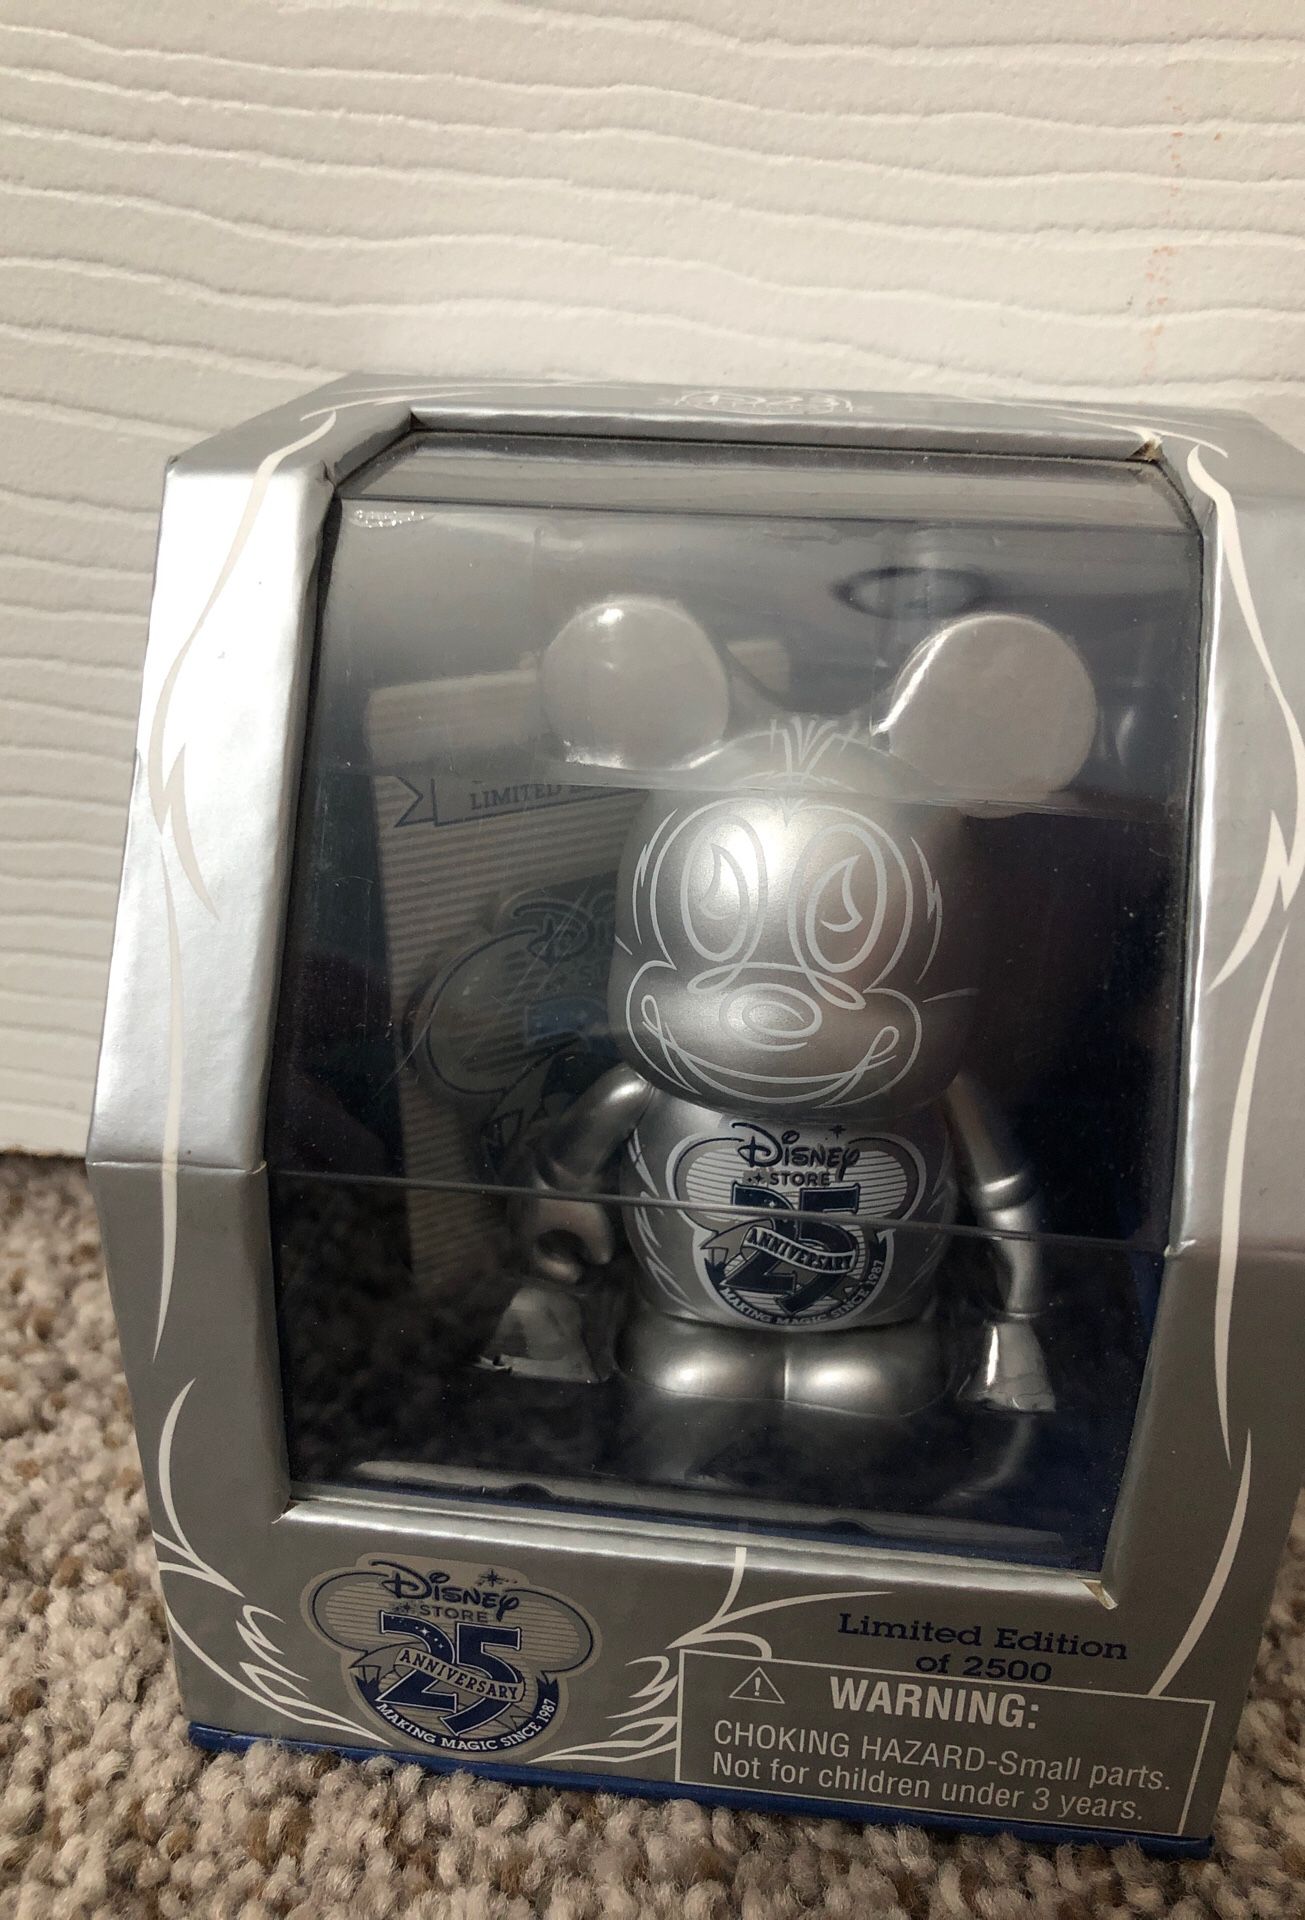 25th anniversary Disney 3” collectible figure & pin